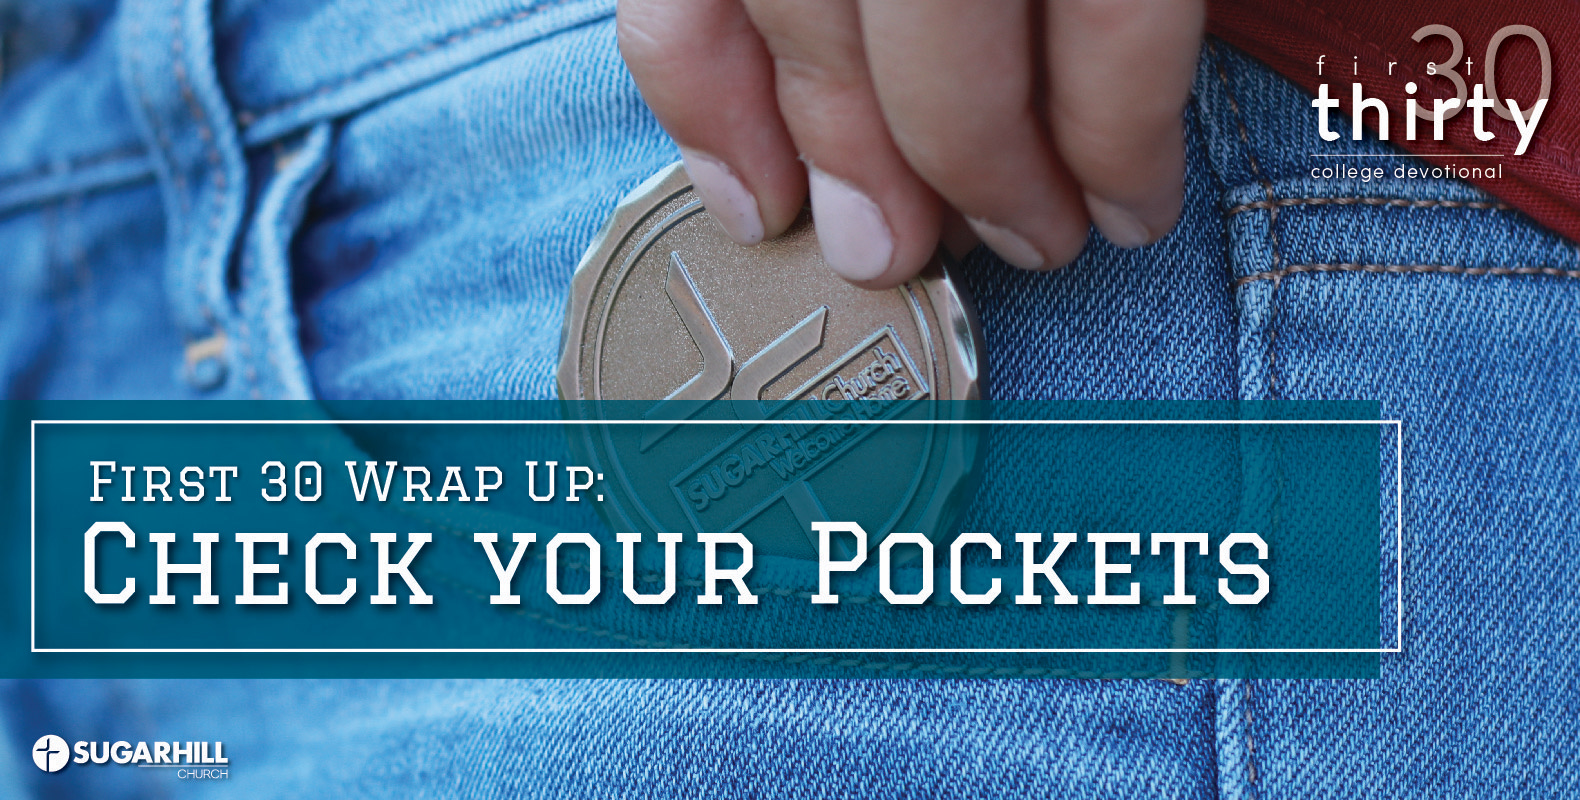 Tripp Atkinson First Thirty Blog Check Your Pockets Challenge Coin